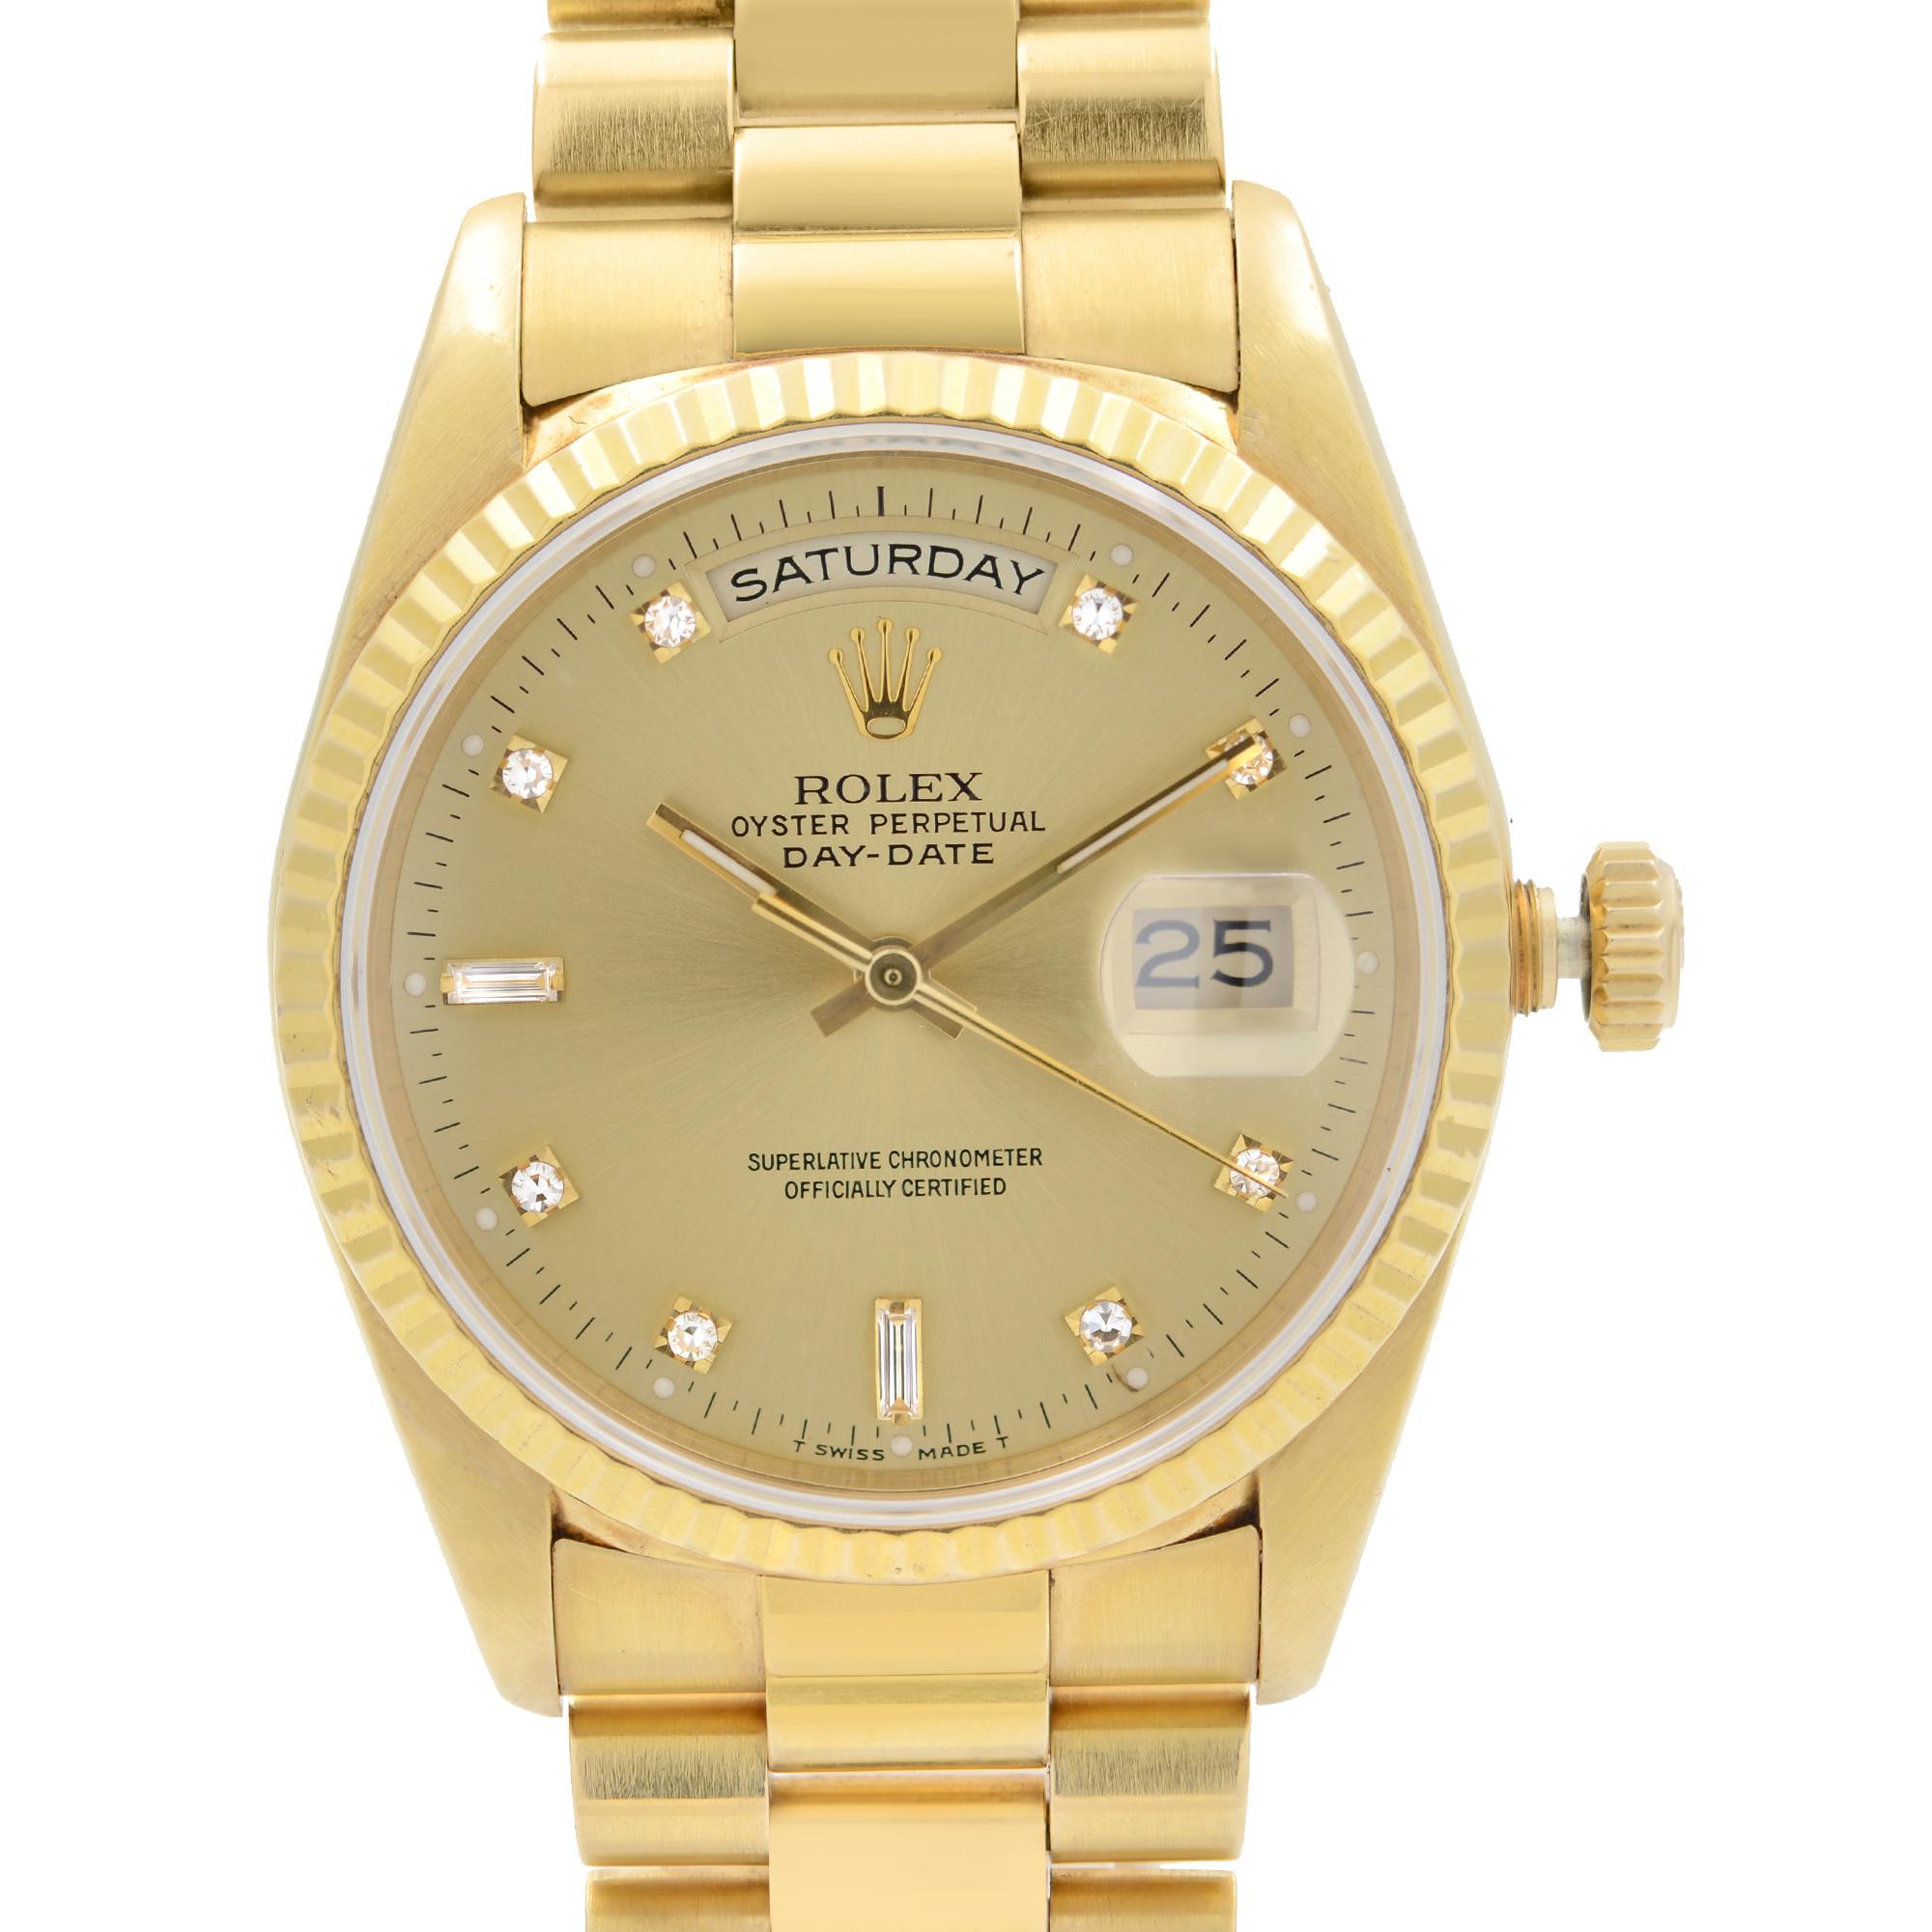 This watch was produced in 1993. Watch band Has Moderat Slack. Rolex President Day-Date 36mm 18K Yellow Gold Diamond Dial Men's Watch 18238 Comes with the seller's Presentation Box and the seller's Authenticity Card. Covered by a 3-year Chronostore